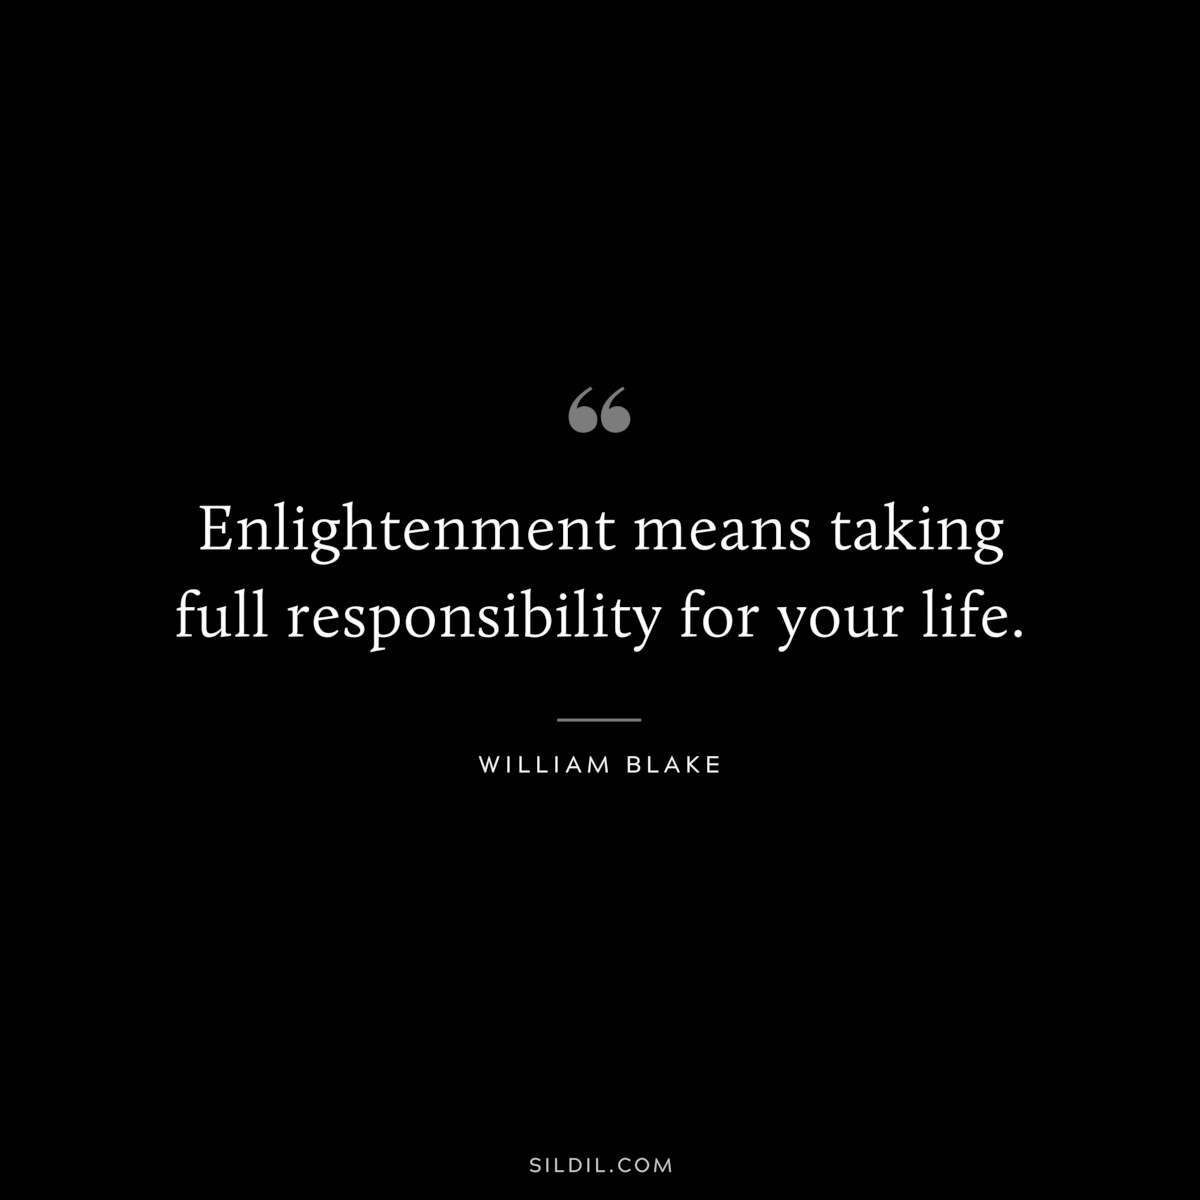 Enlightenment means taking full responsibility for your life. ― William Blake